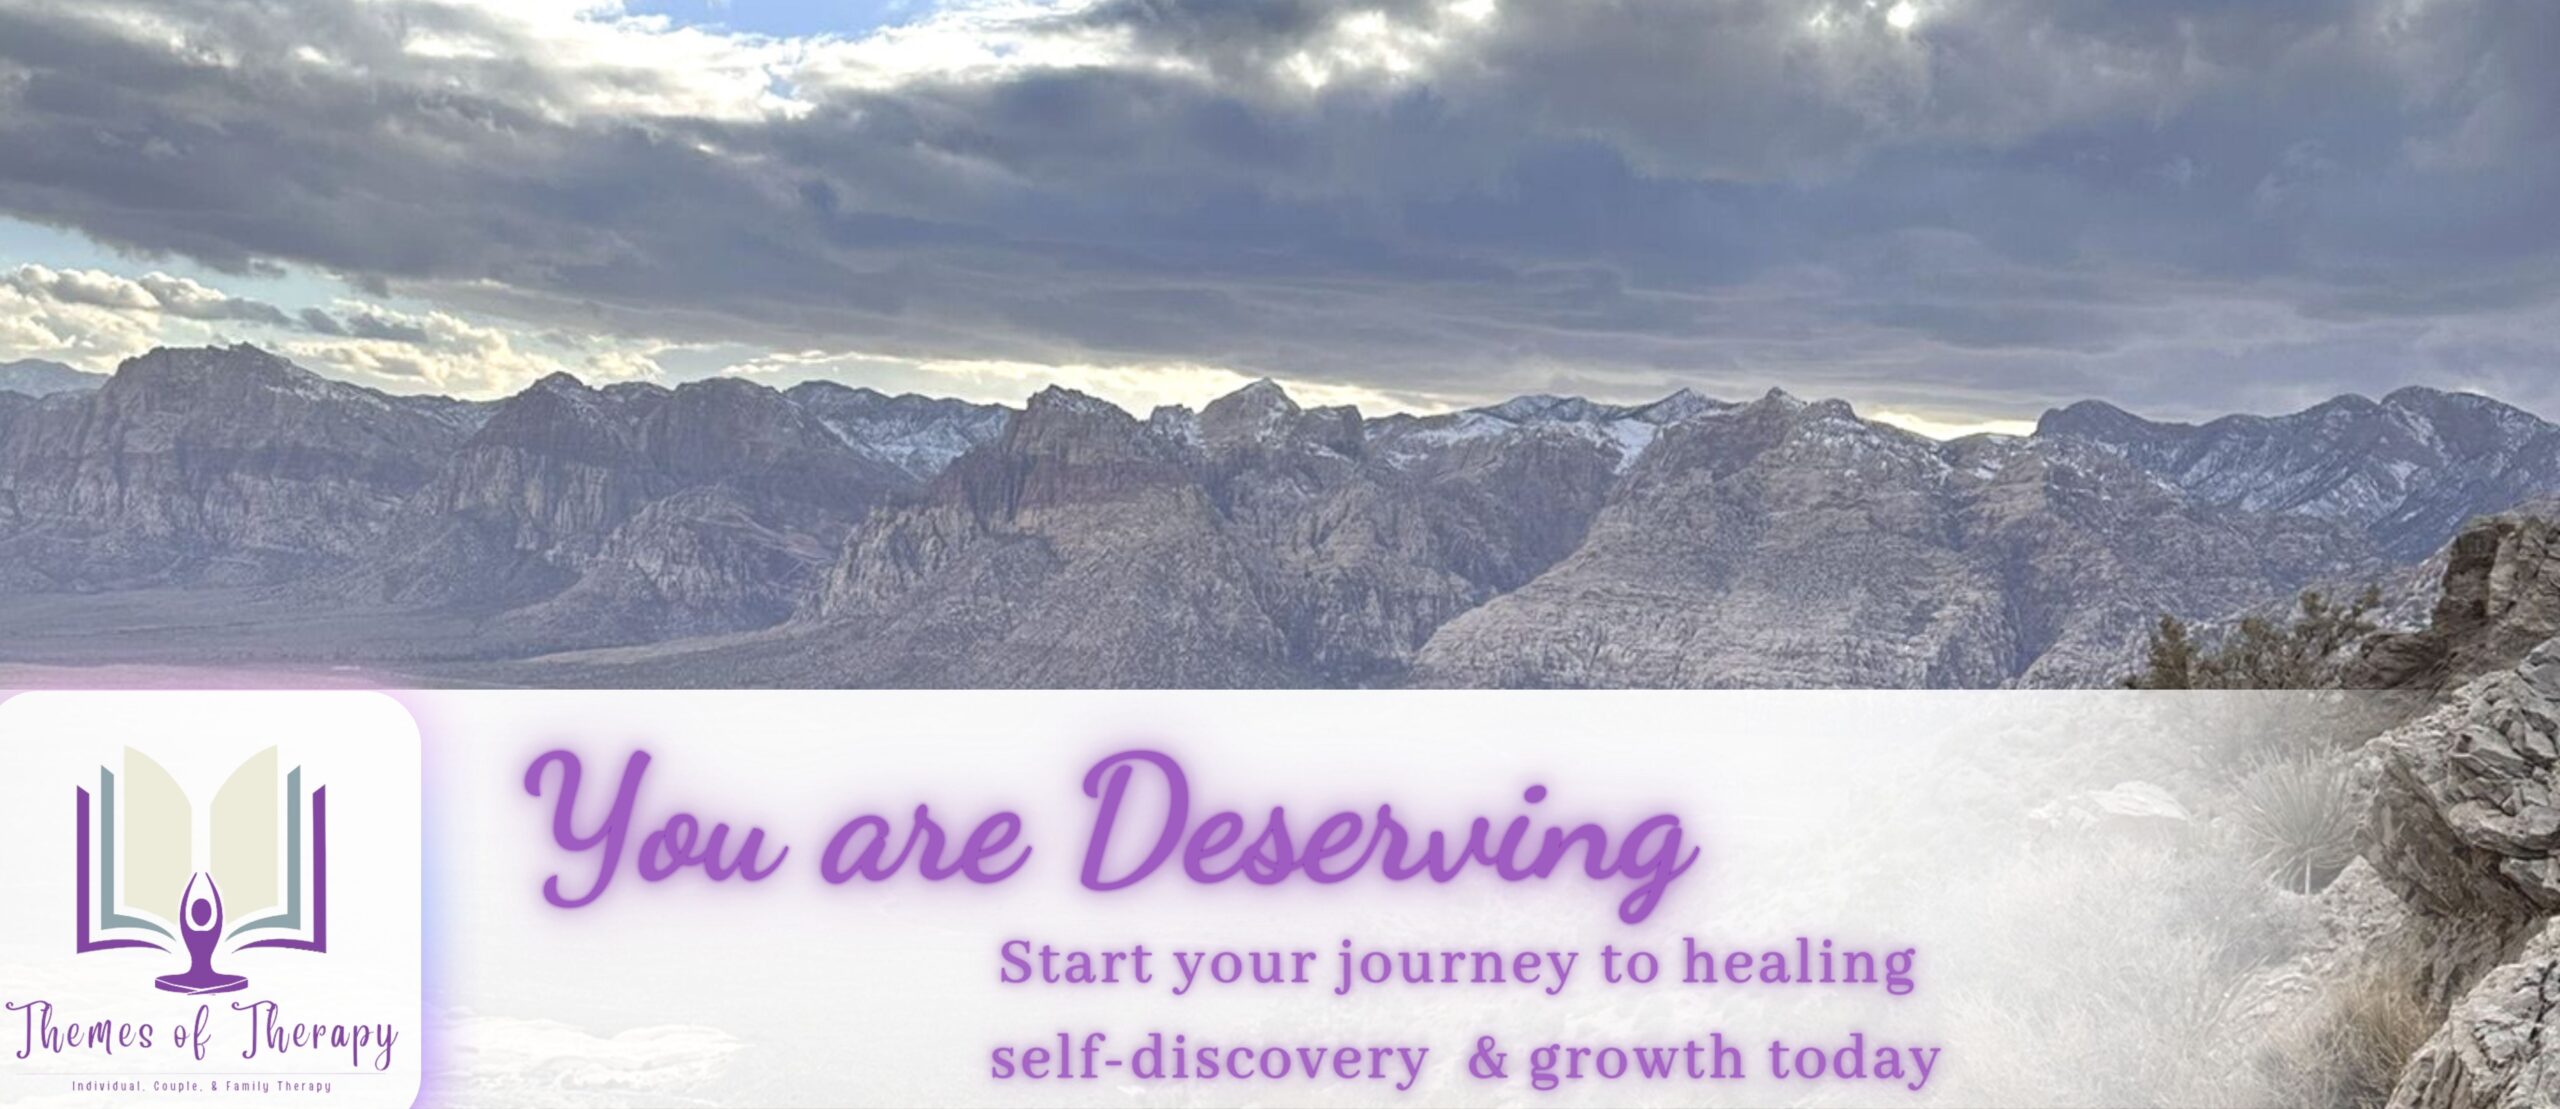 Themes of Therapy Services. You are Deserving. Start your journey to healing and self-discovery today.